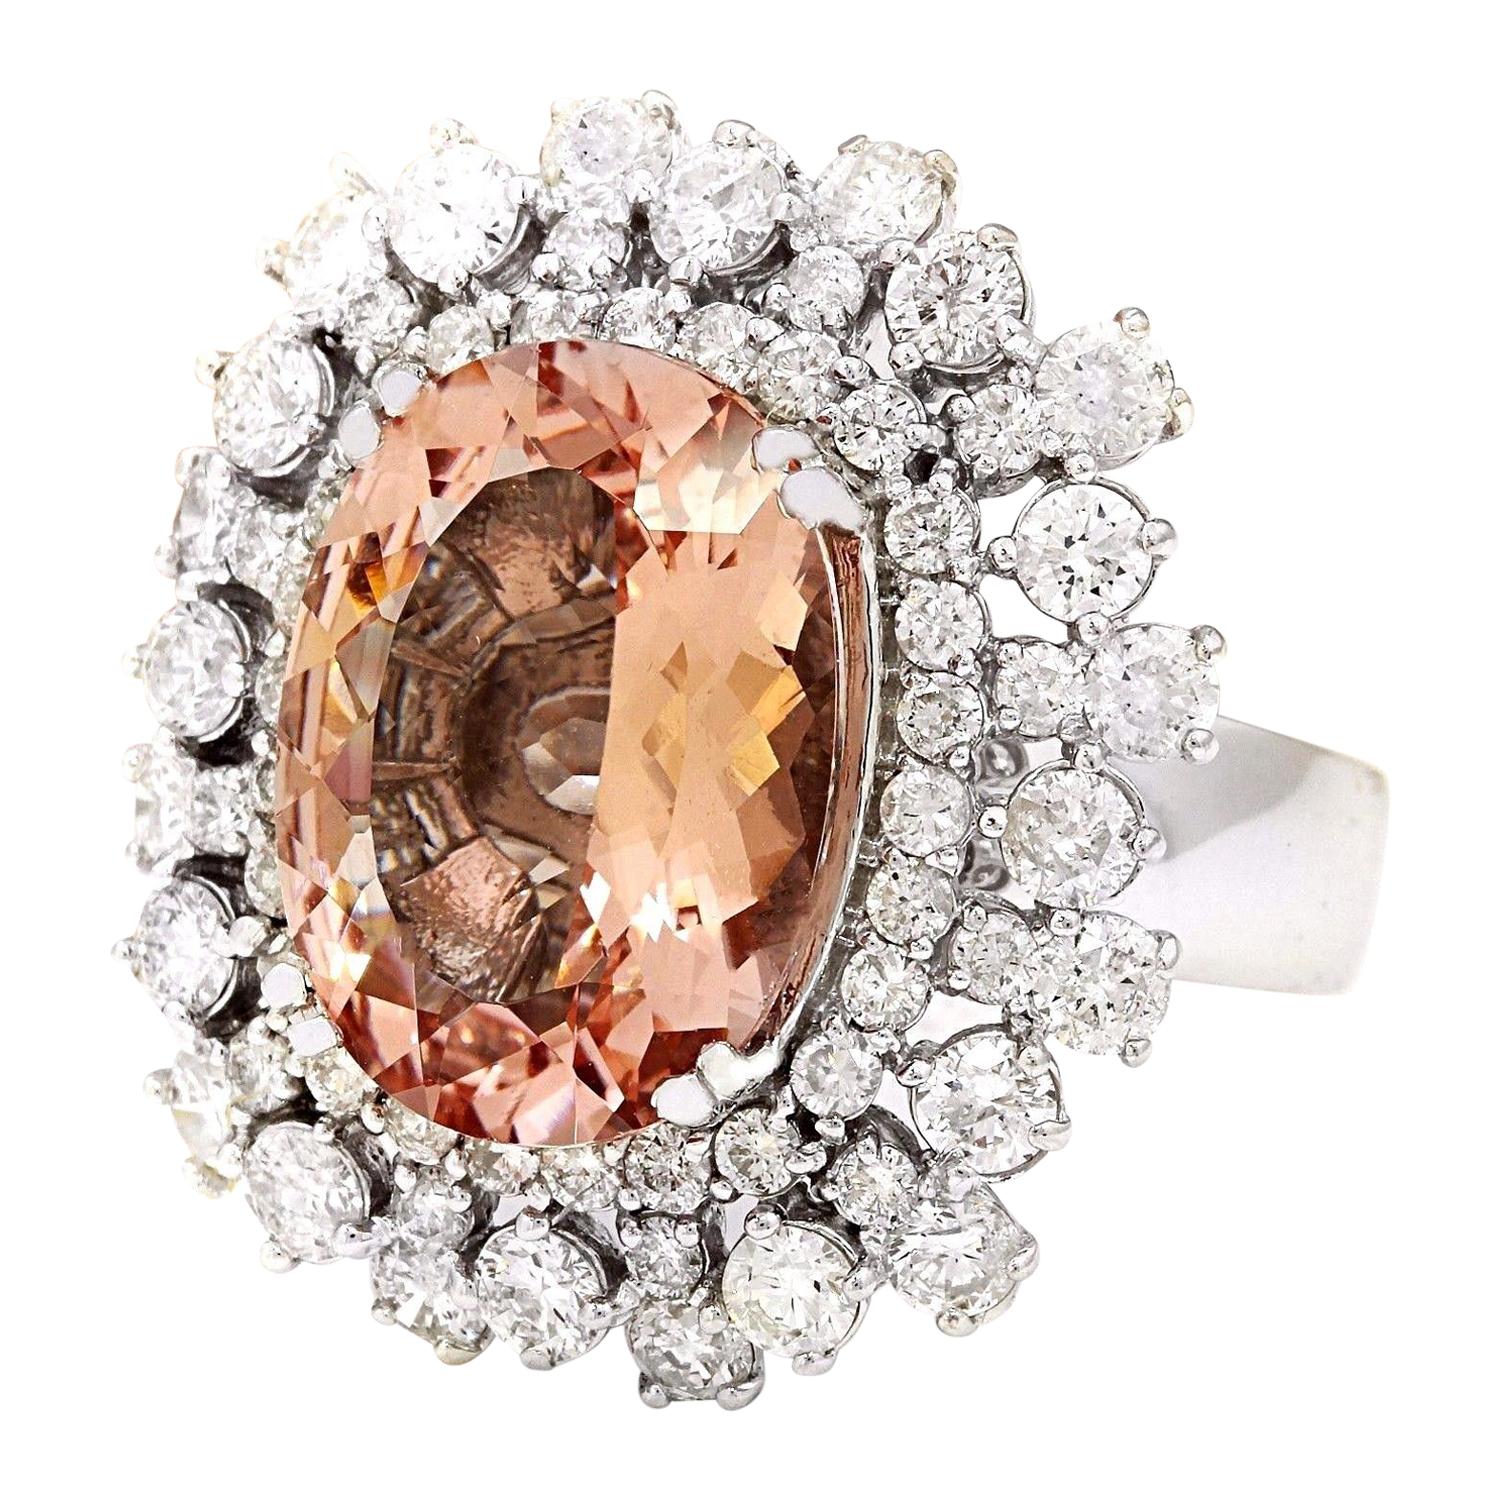 Introducing an exquisite masterpiece of opulence and sophistication: the Morganite Diamond Cocktail Ring in 14K Solid White Gold. With a total weight of 13.35 carats, this ring epitomizes luxury.

At its heart lies a mesmerizing oval-shaped